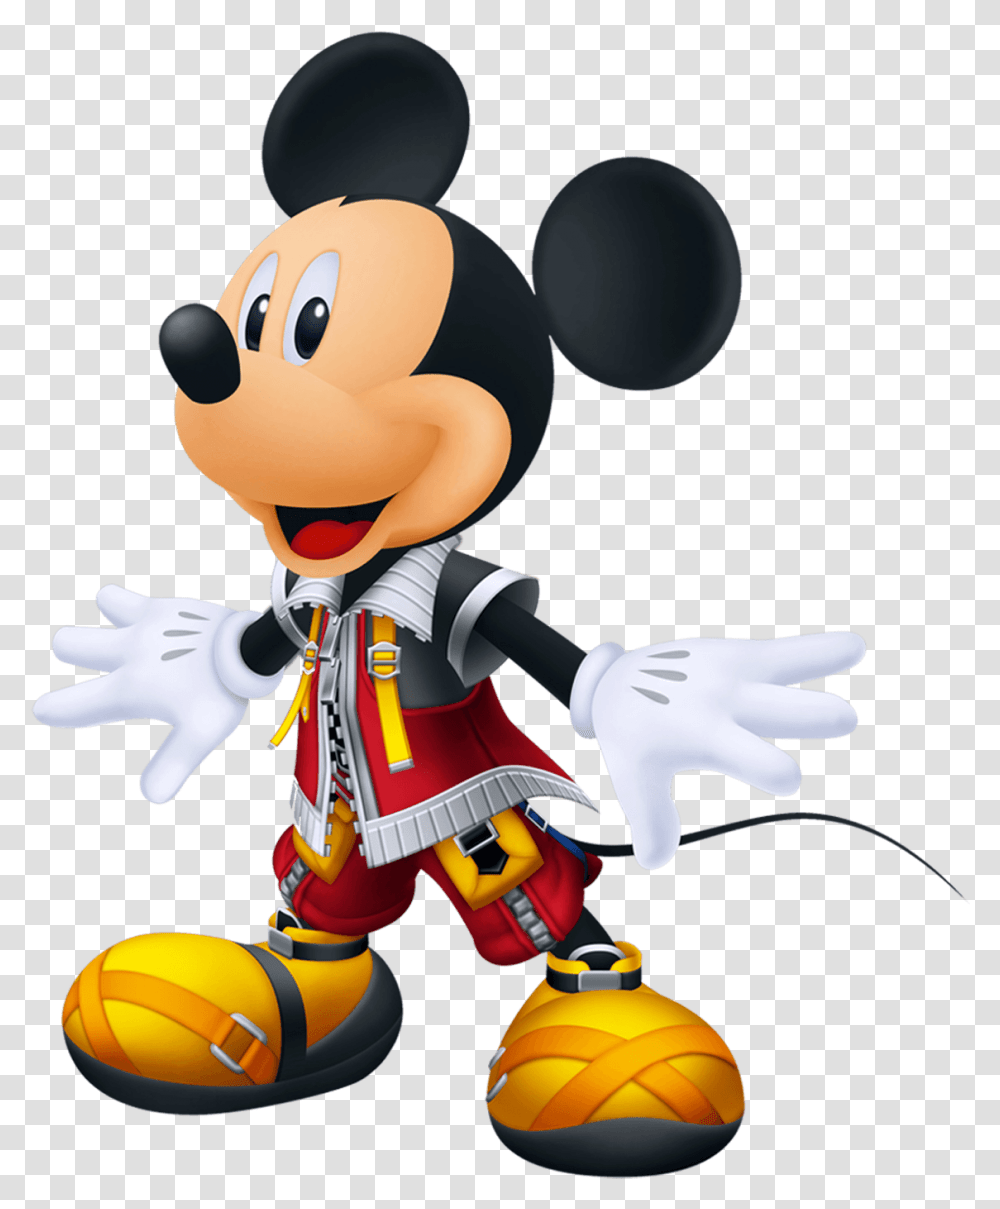 Mickey Mouse Kingdom Hearts Wiki Fandom Powered By King Mickey Kingdom Hearts, Toy, Apparel, Mascot Transparent Png